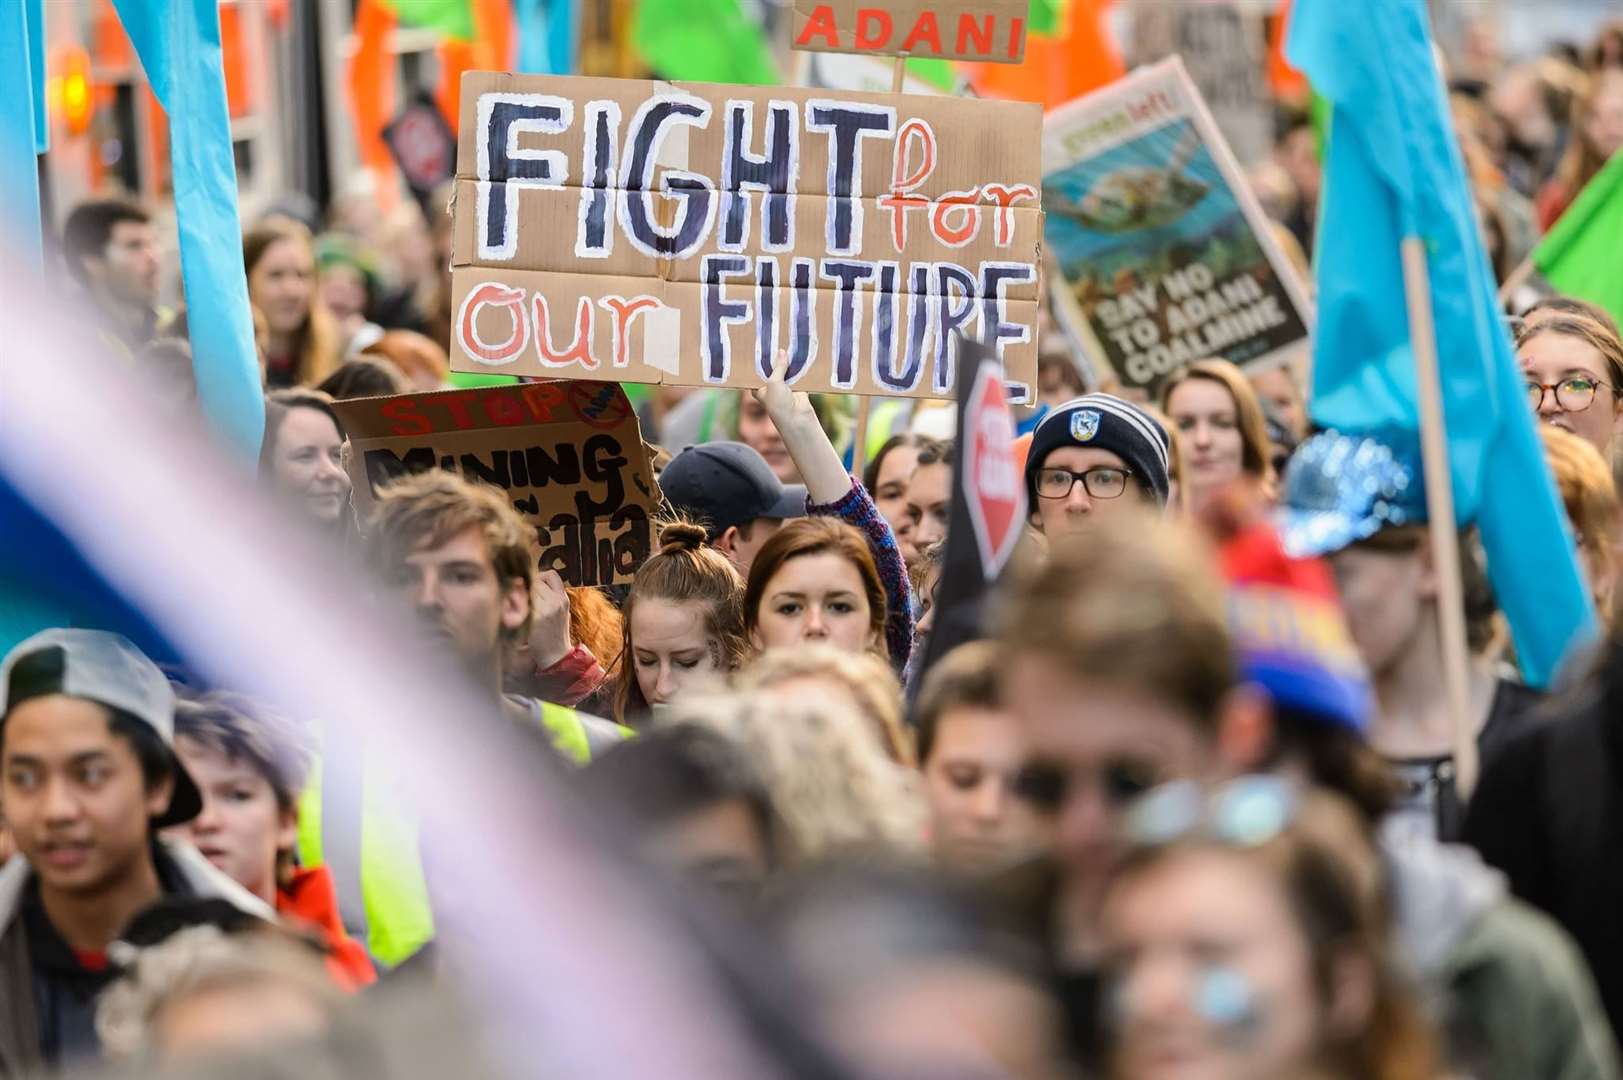 Campaigners are calling for a change. Pictured: A previous Extinction Rebellion protest